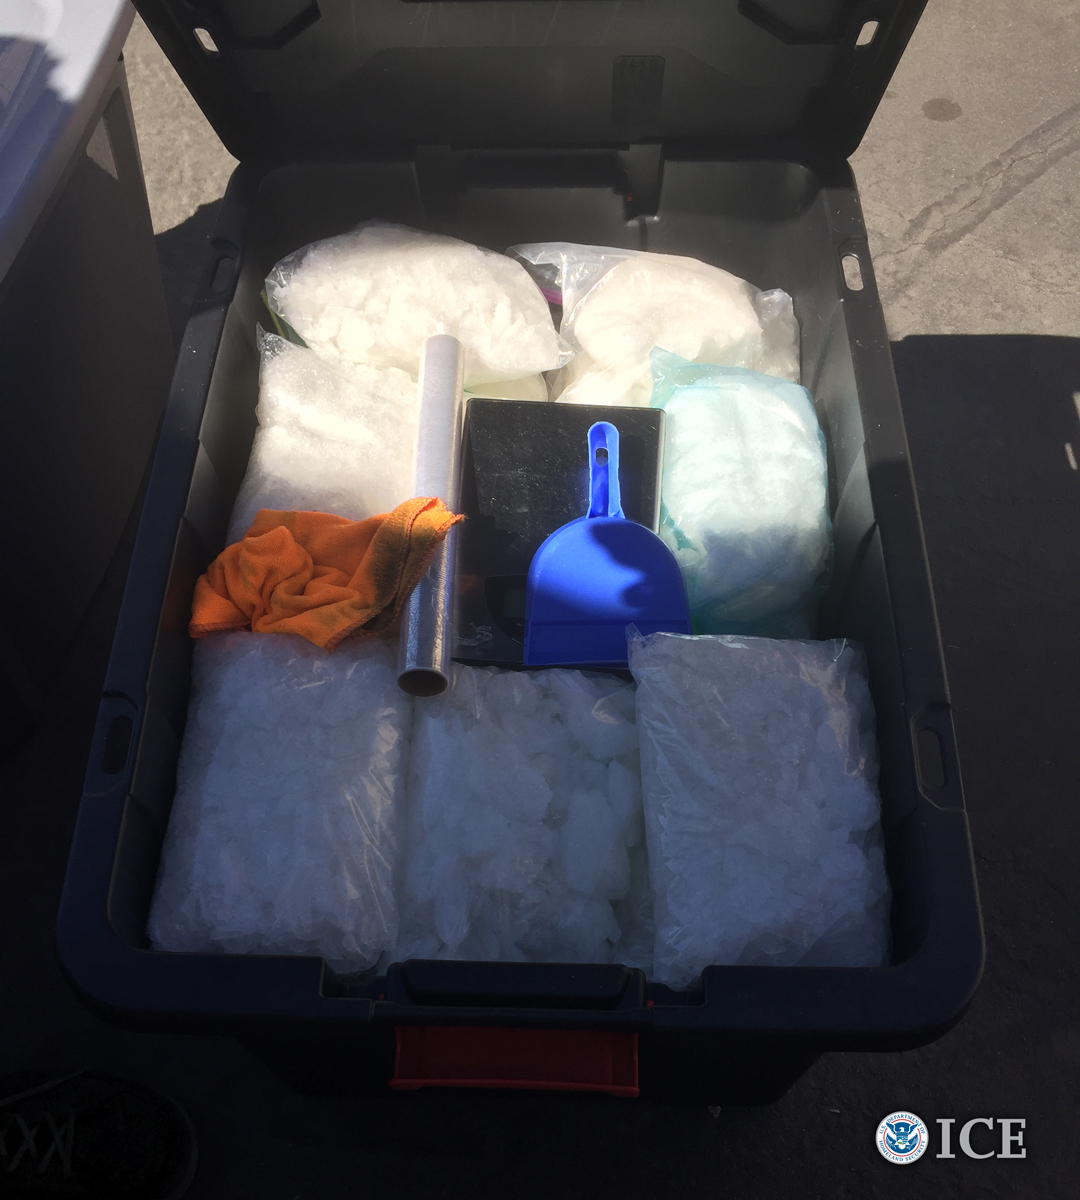 2 Phoenix-area brothers arrested following probe targeting Mexican meth smuggling scheme